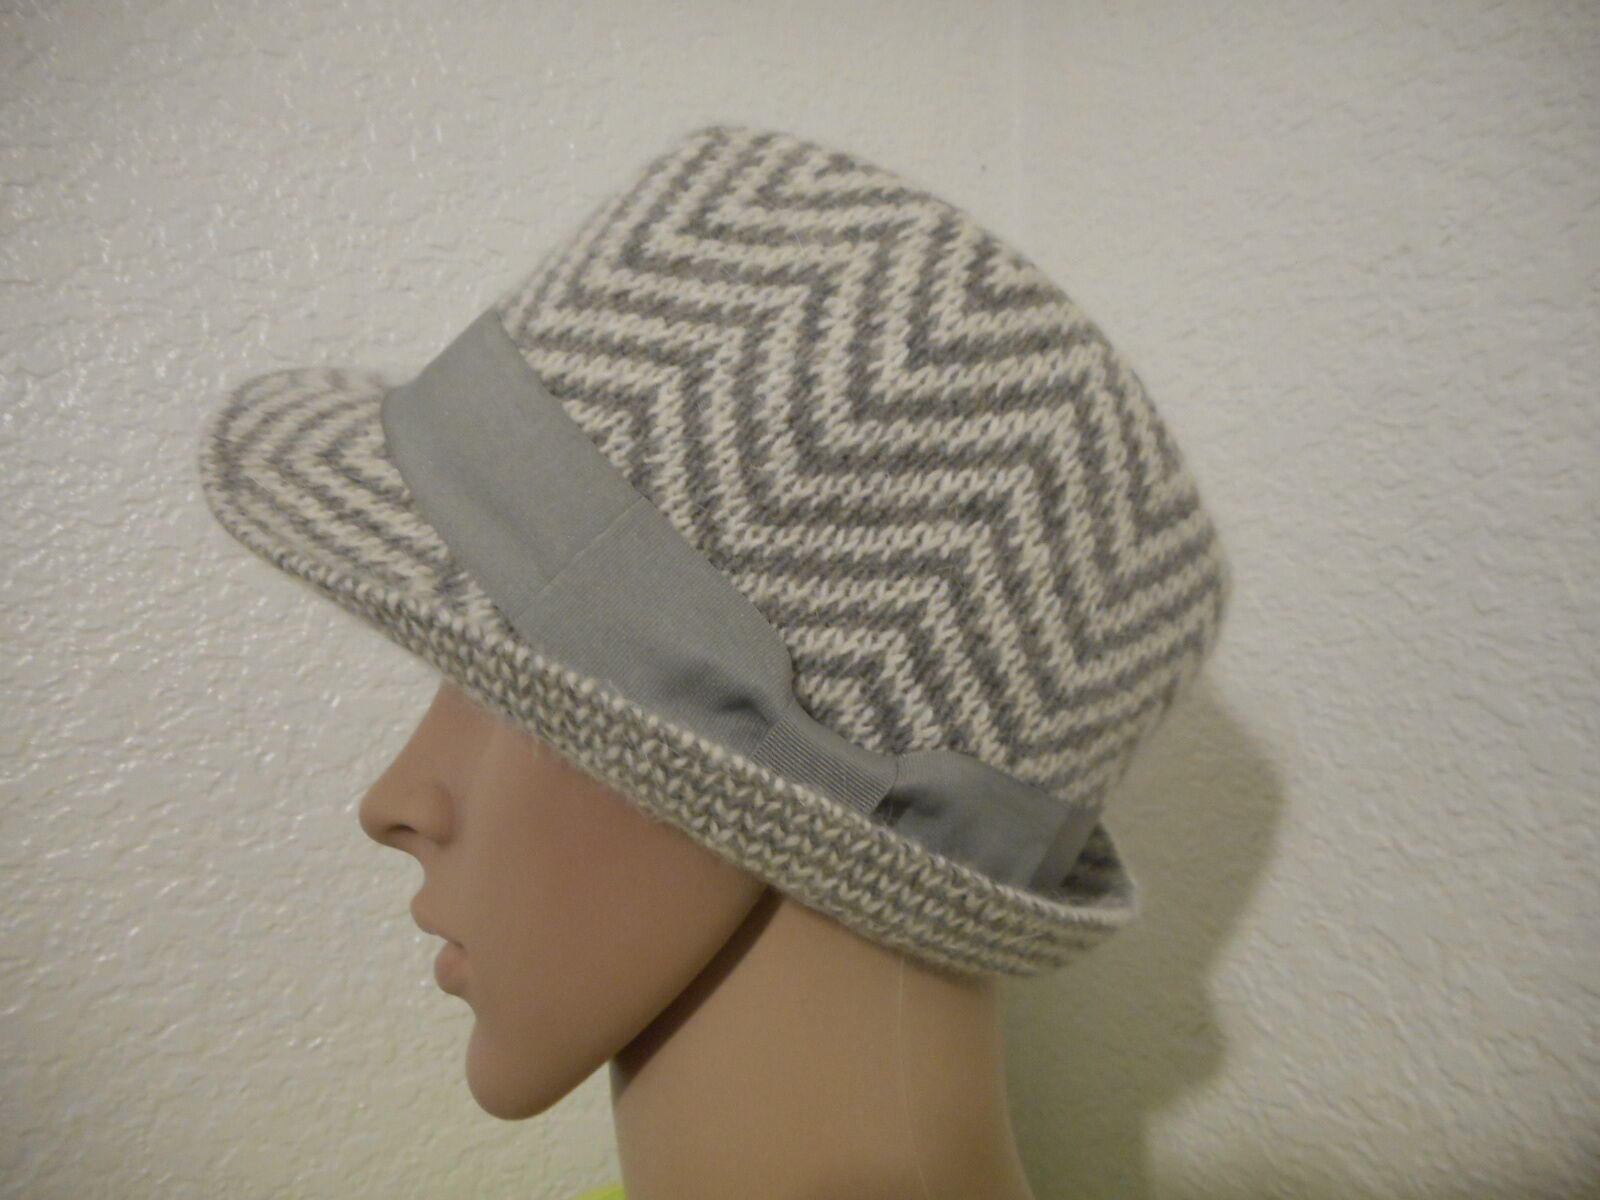 Primary image for Women's Scala Pronto Patterned Fedora Hat Grey  NEW